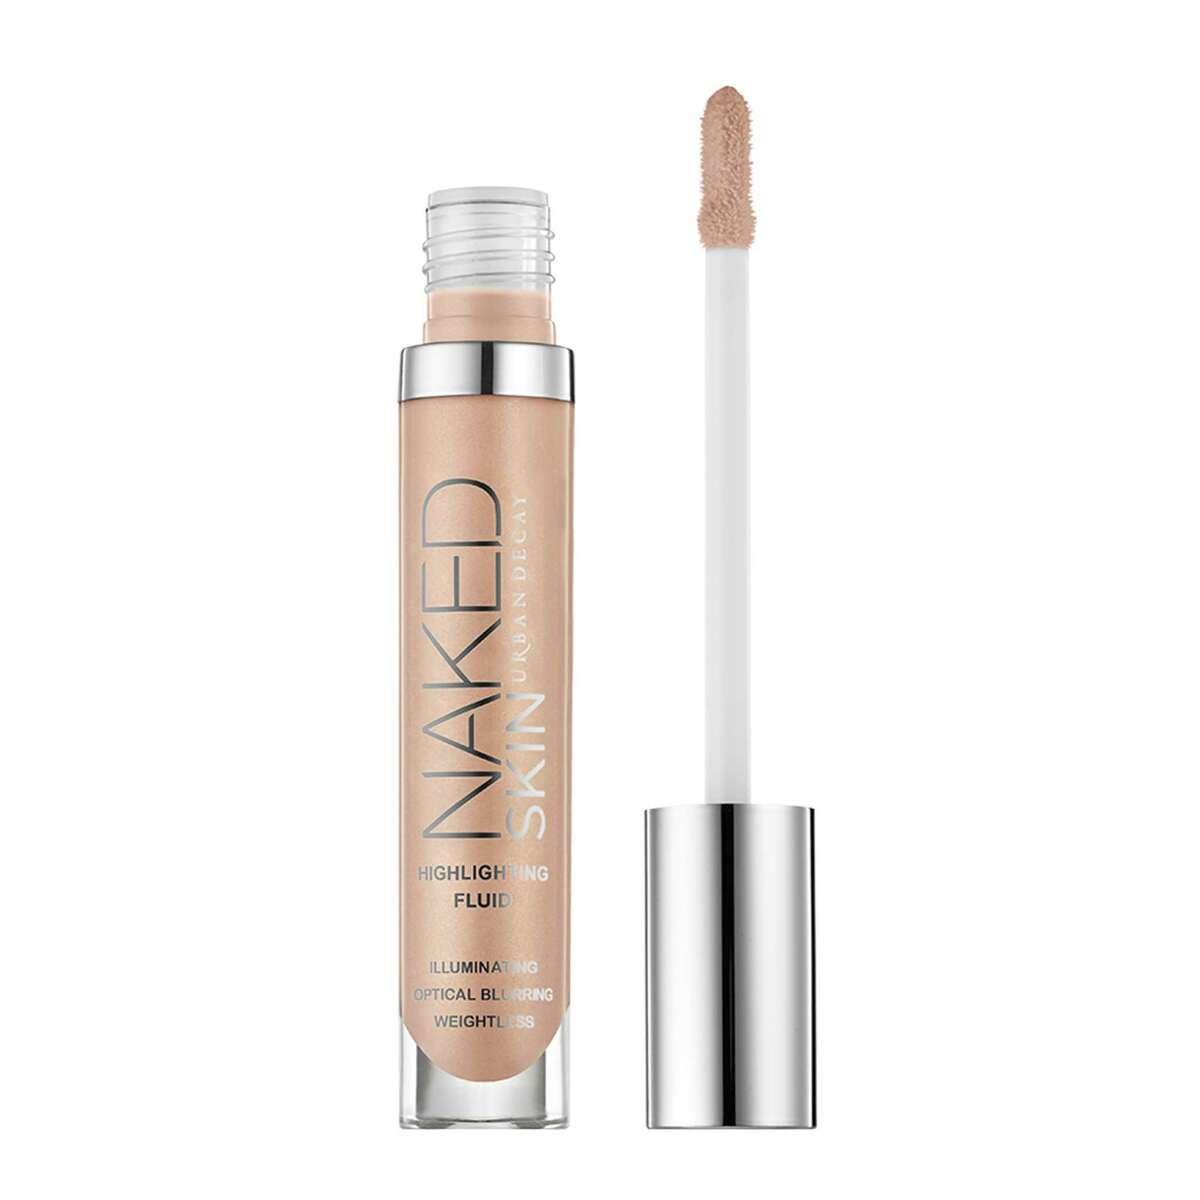 Need a quick skin fix that is both blurs flaws and provides a dewy glow? Reach for the new Urban Decay Naked Skin Highlighting Fluid, a creamy highlighter wand that creates a glowing, strobed effect on cheekbones, nose, temples, or chin. In five shades; $28 at Sephora, Ulta, and Macy?s stores.